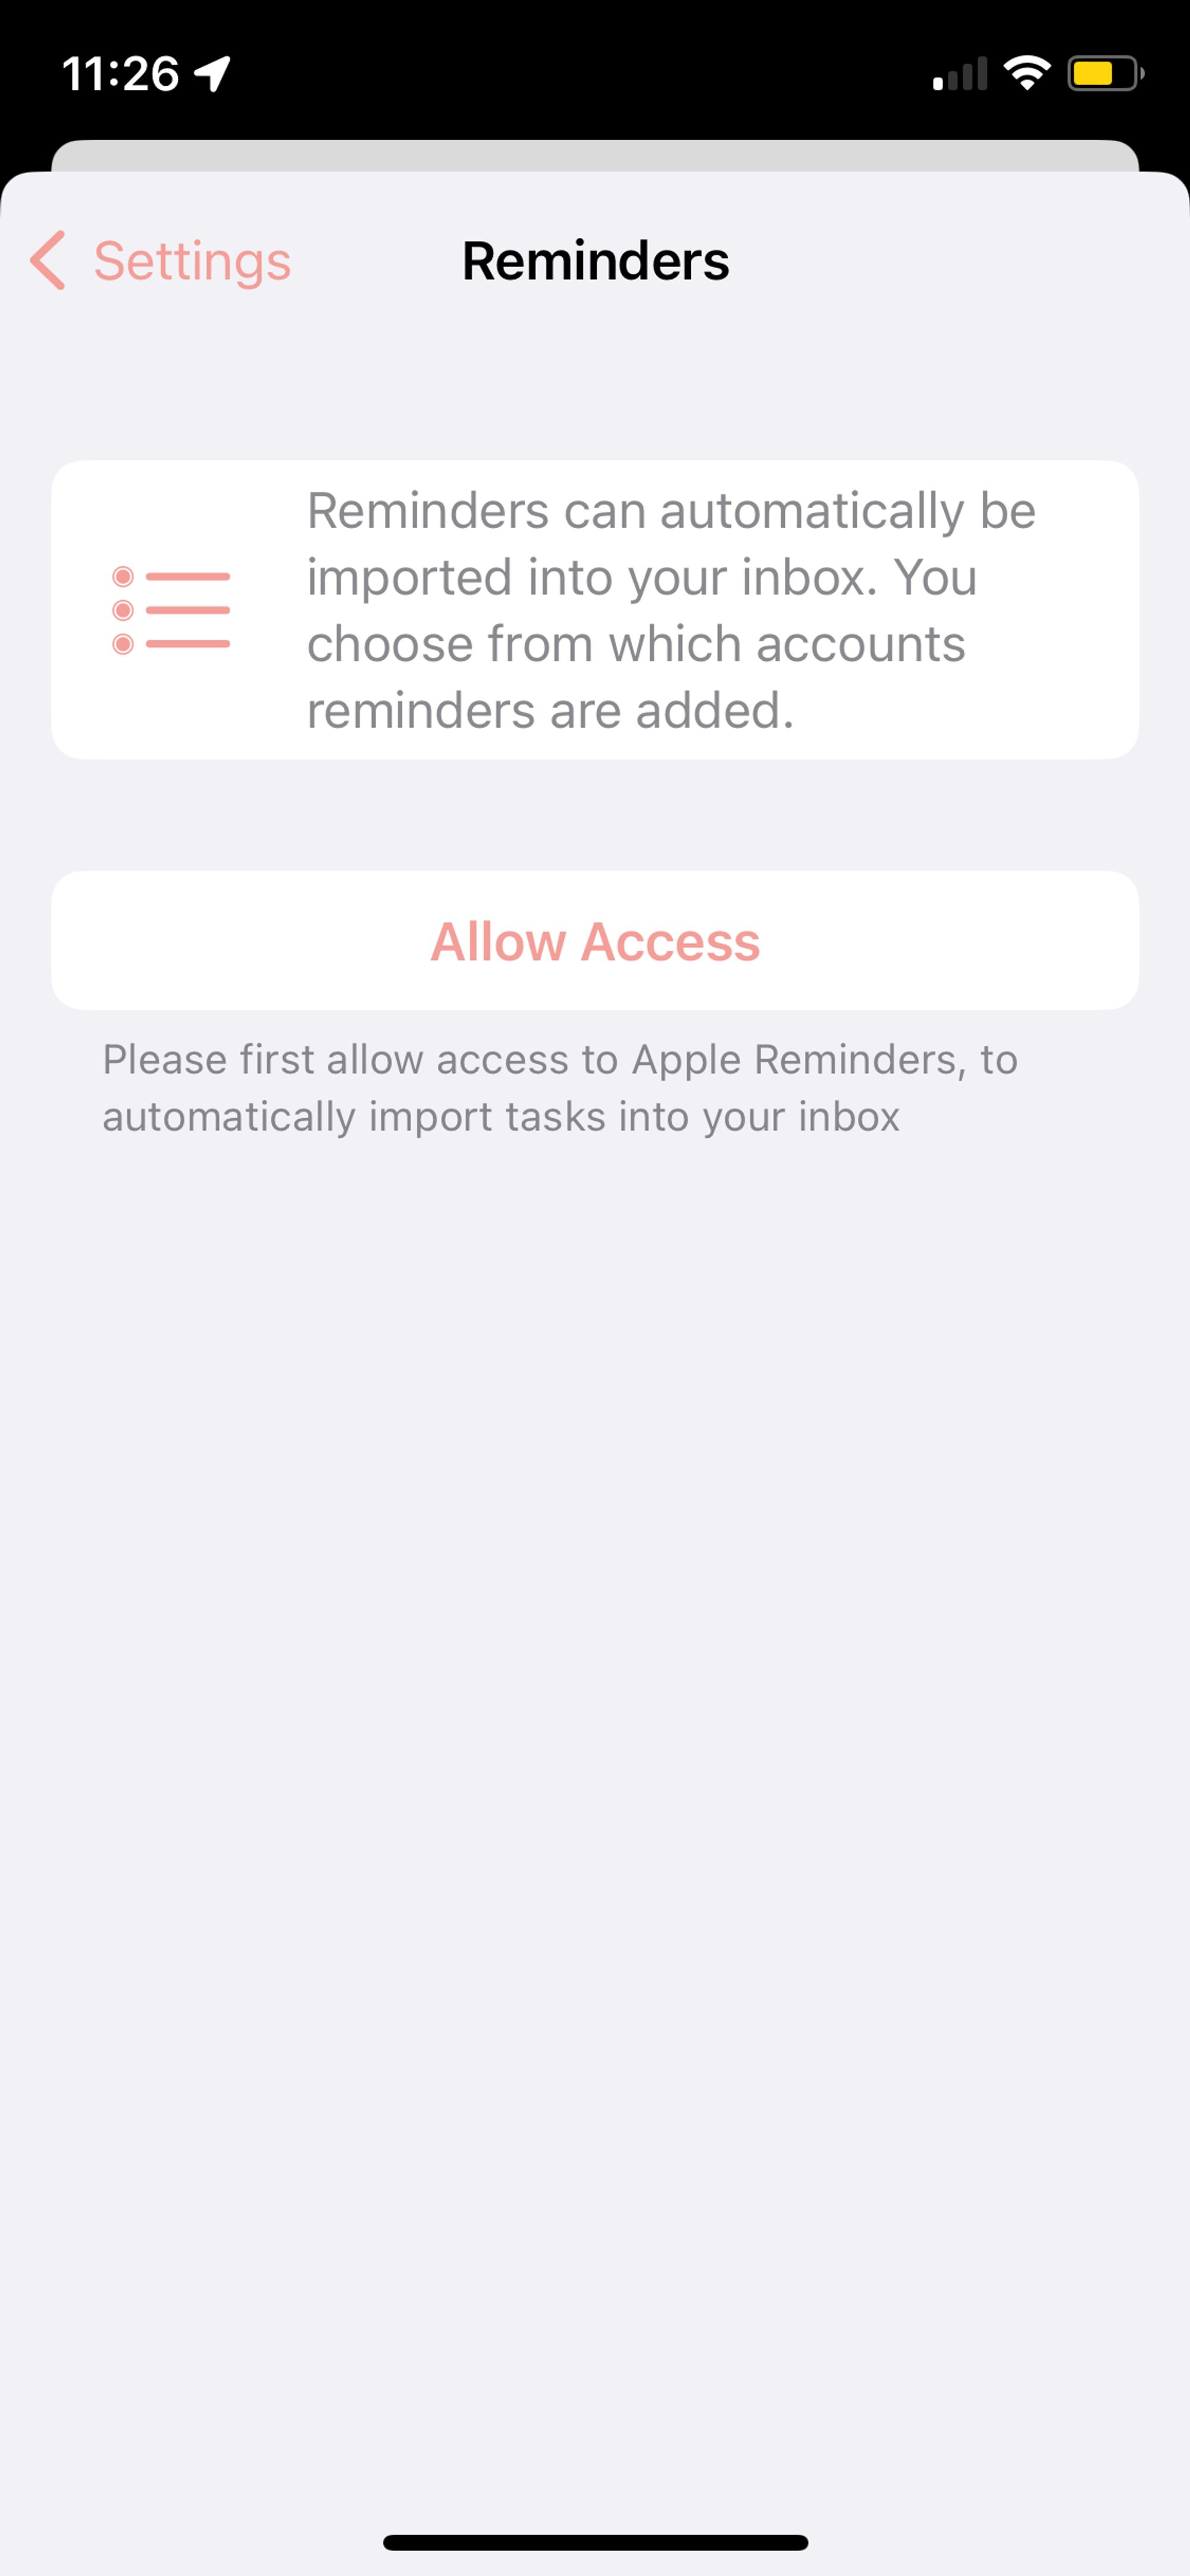 Tap "Allow Access" and then "Allow" in the popup.